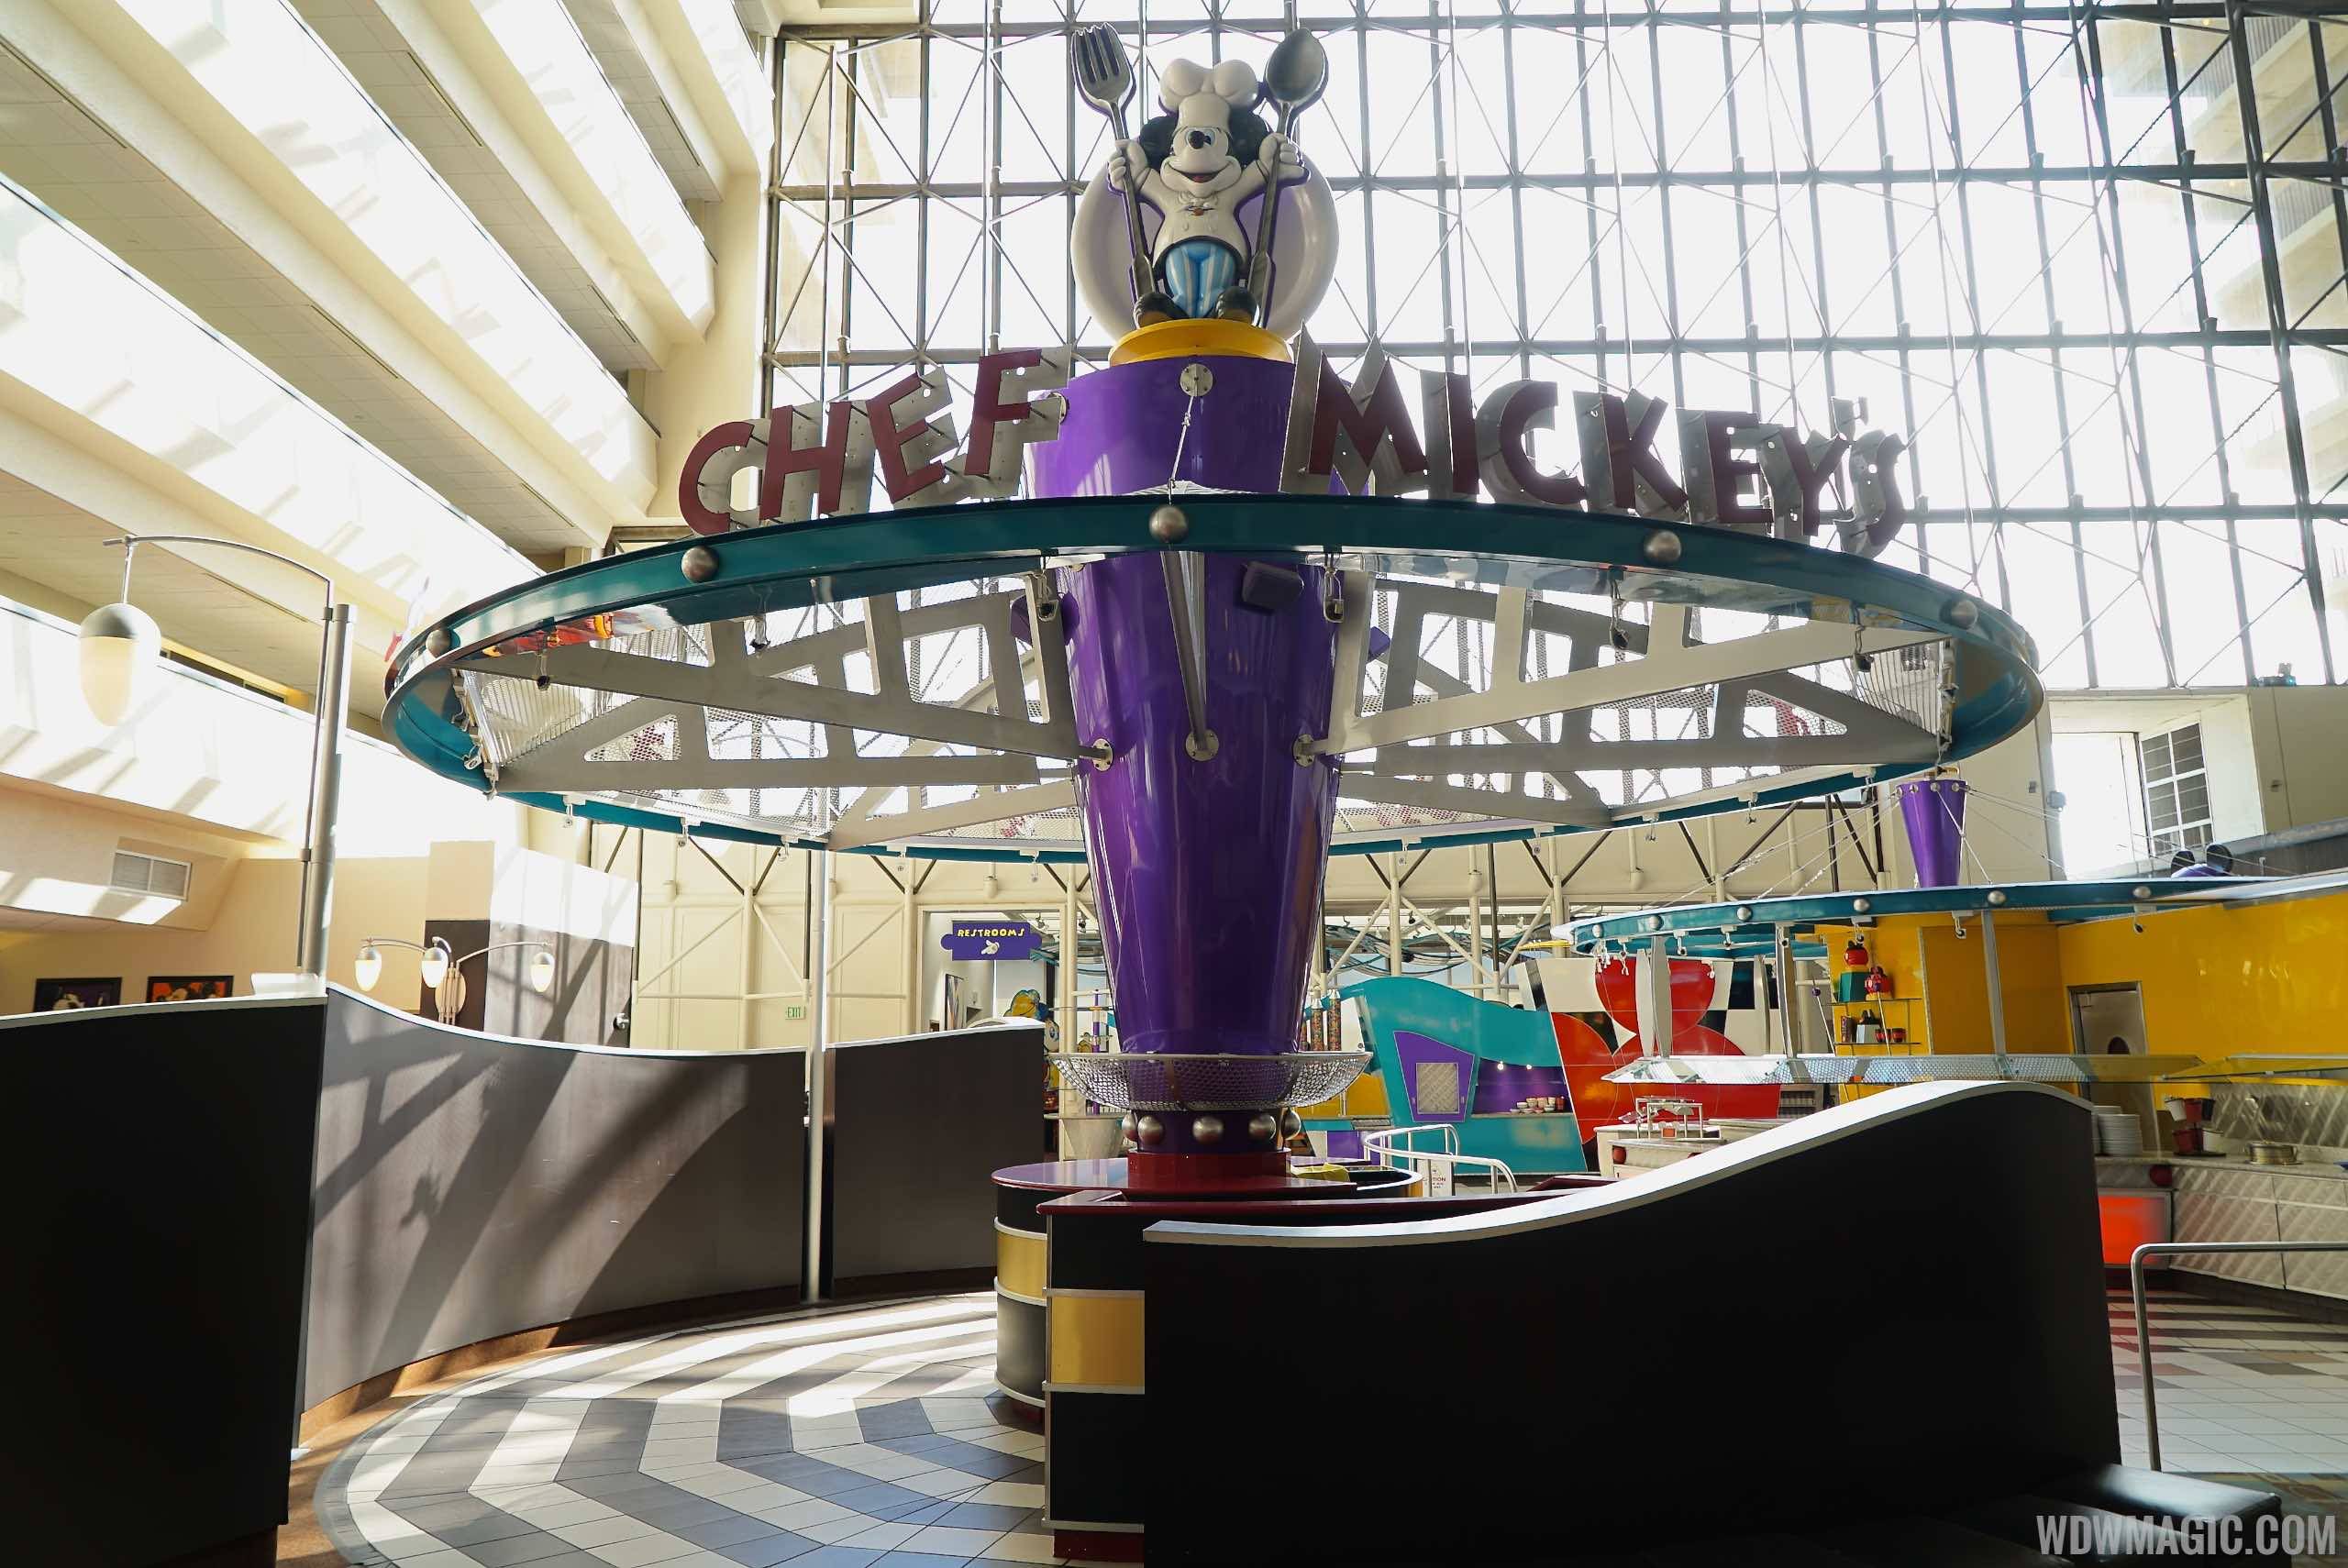 Chef Mickey's to be refurbished in the near future